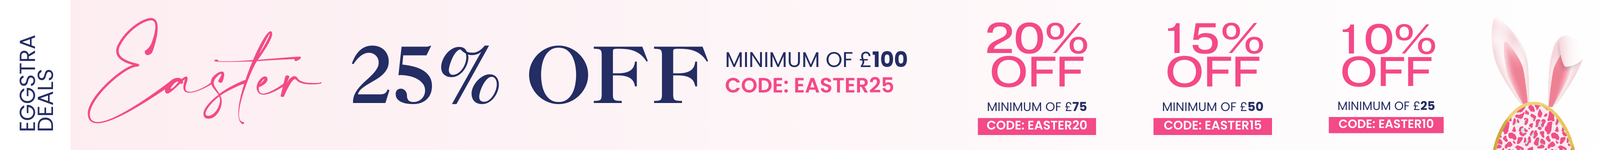 Easter Madness season, shop now!